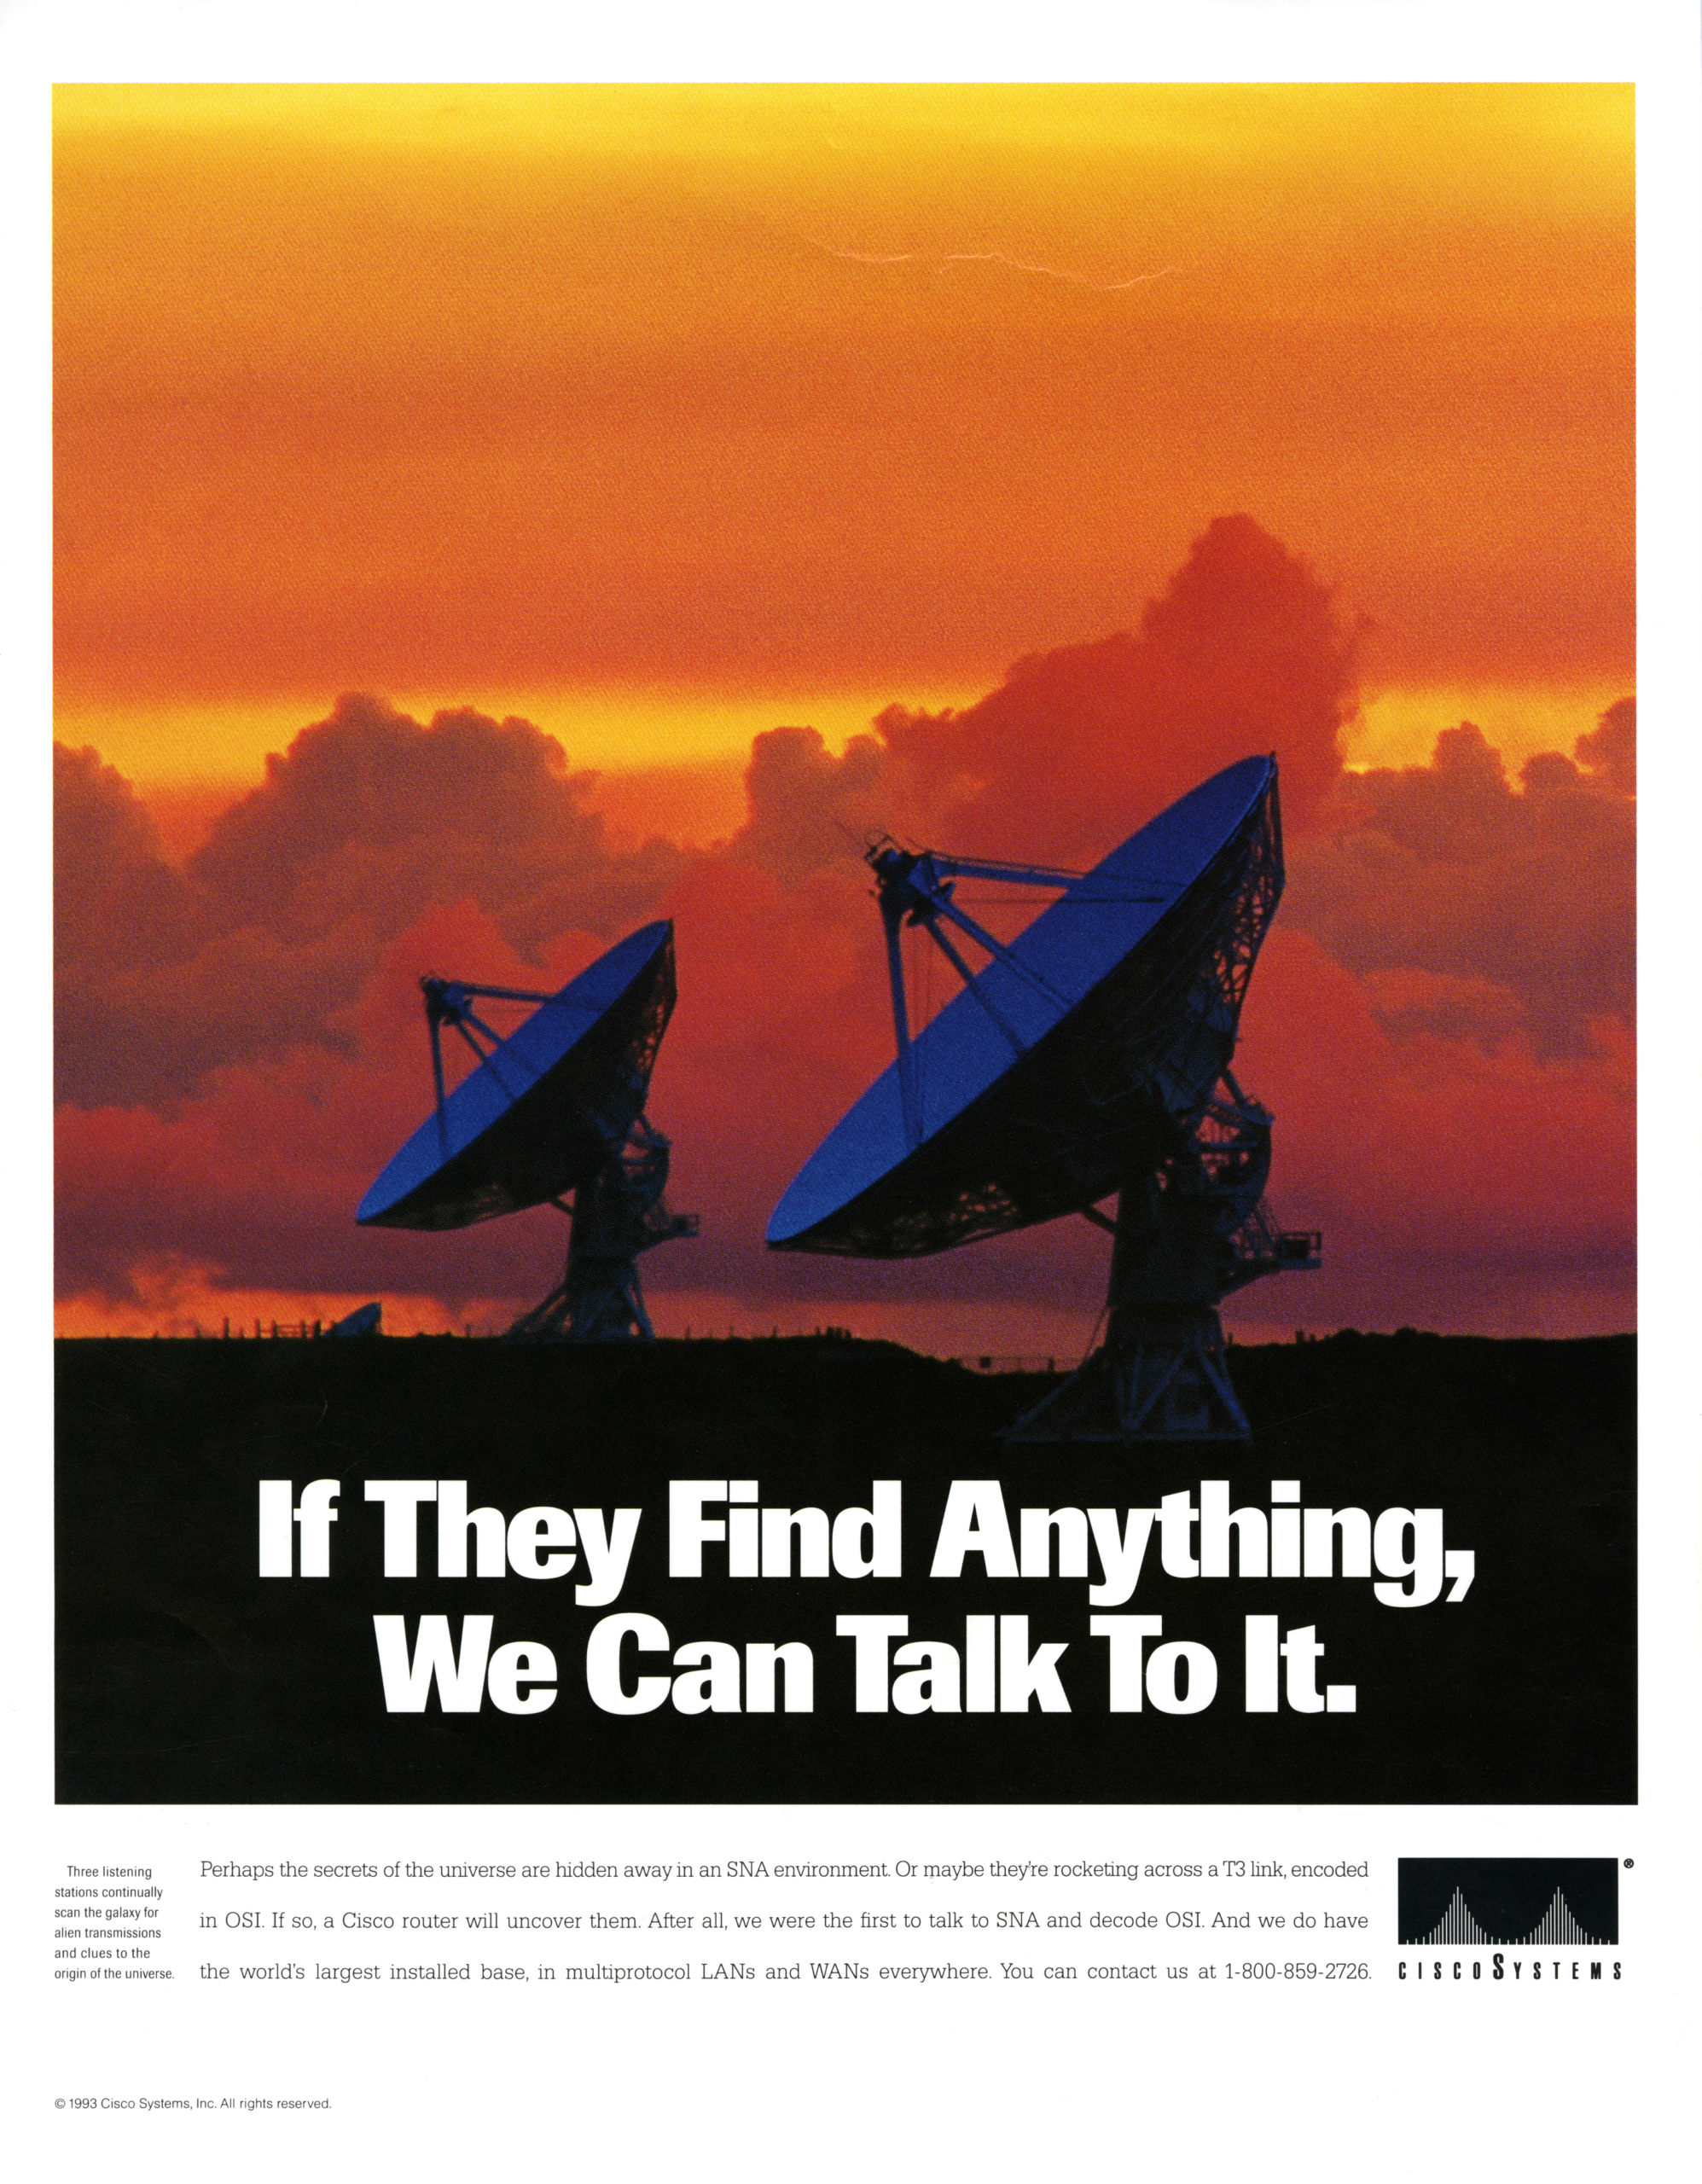 Two radio telescopes against an orange cloudy sky background with the text "If They Find Anything, We Can Talk To It."